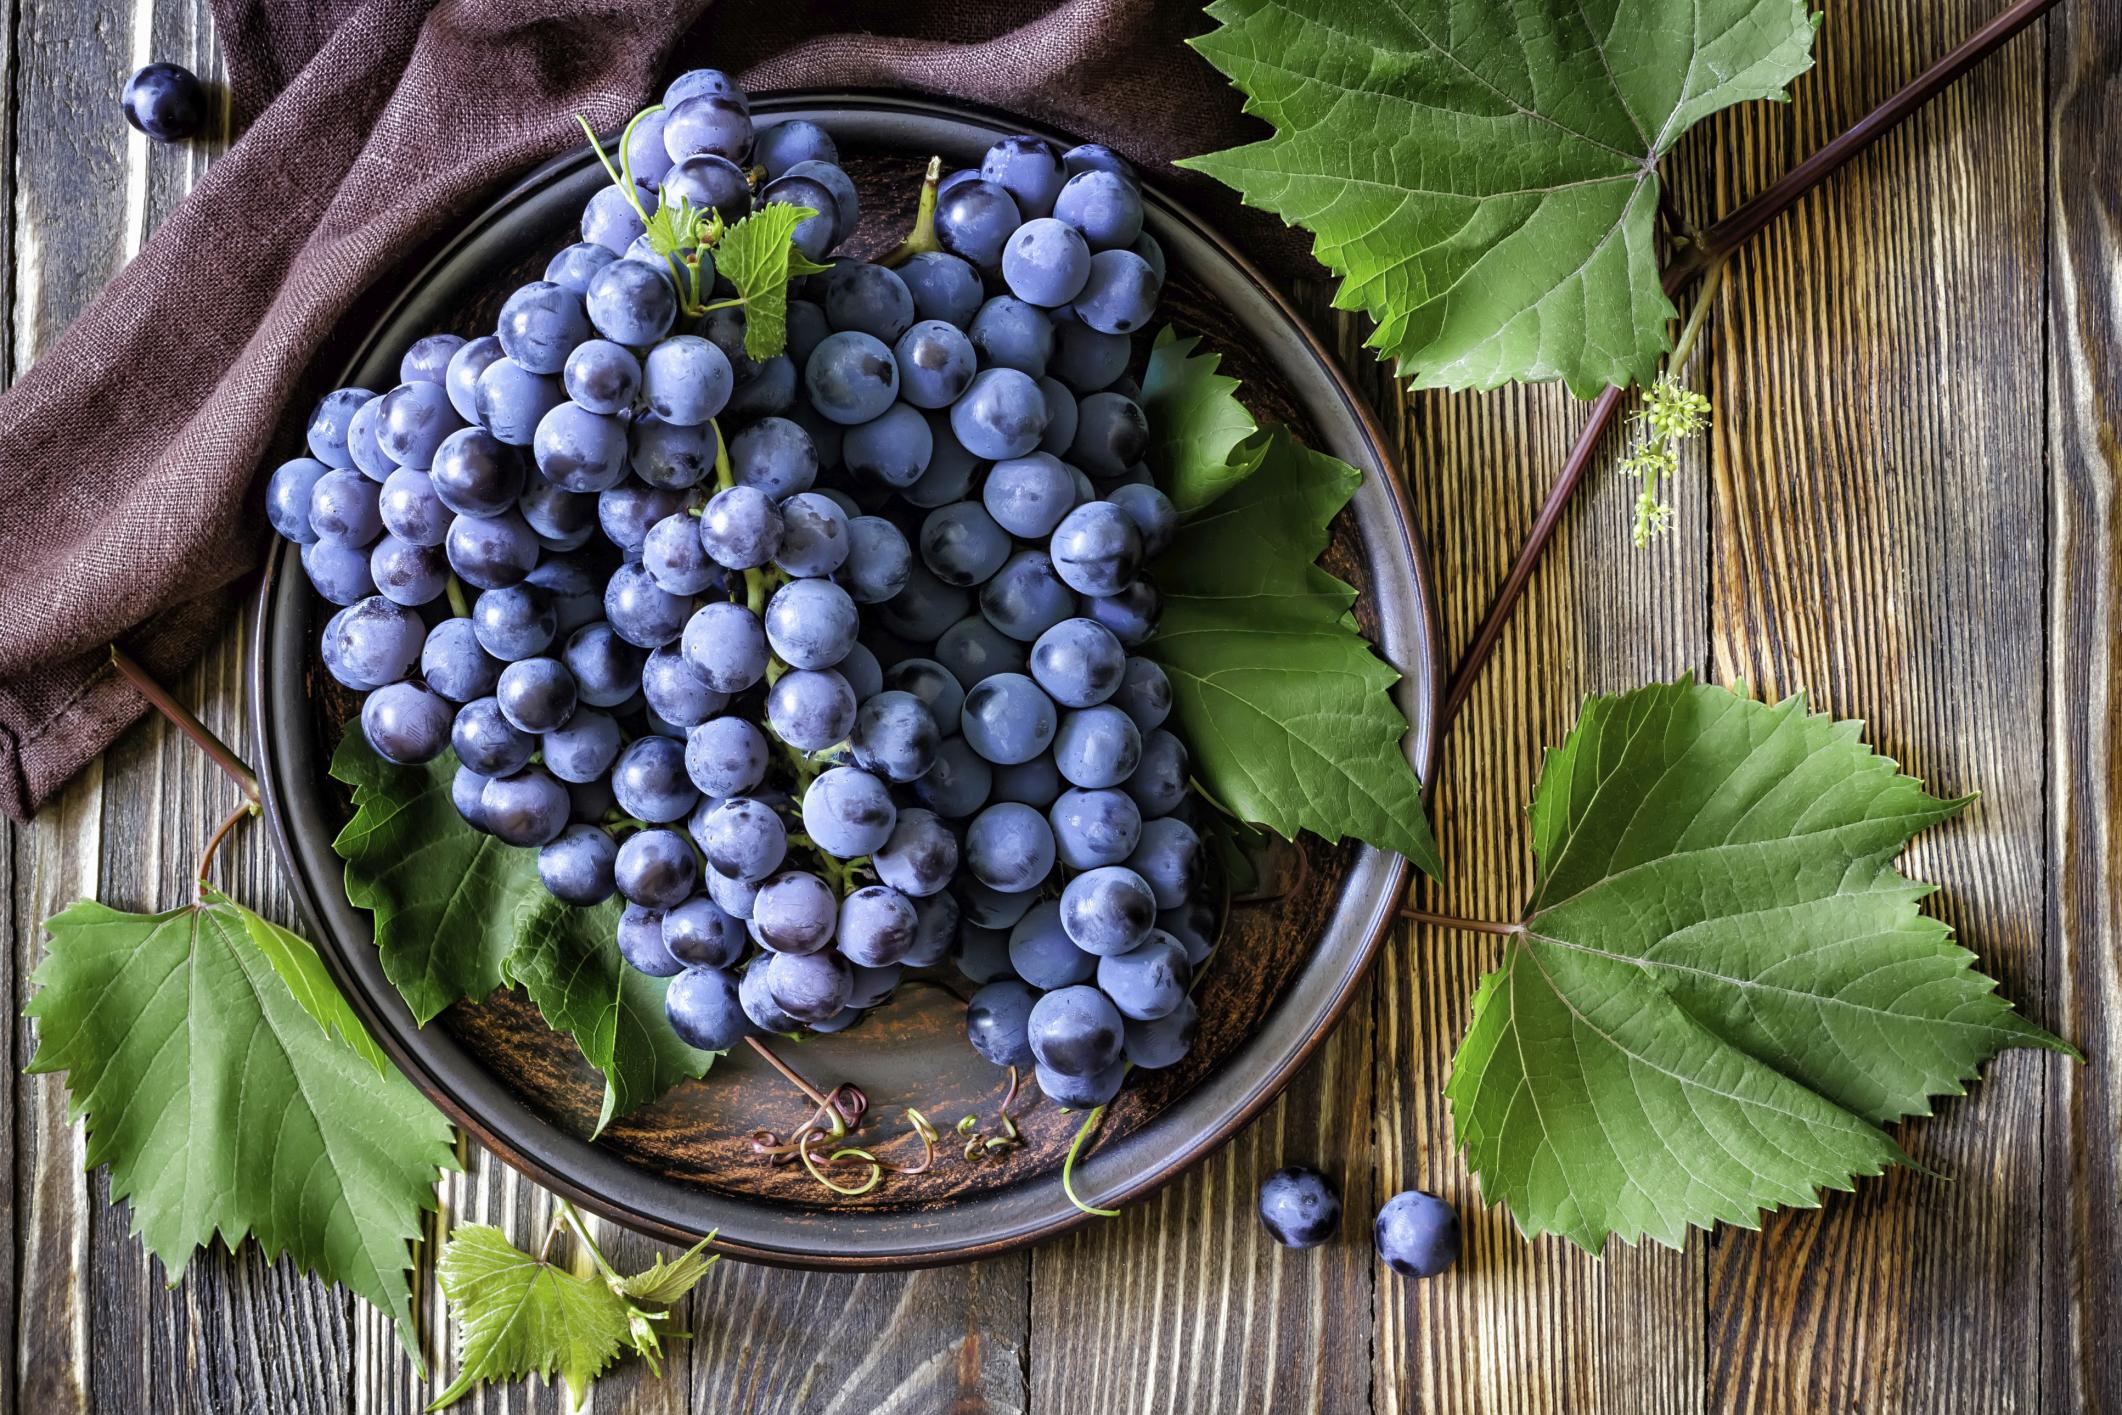 A bunch of ripe blue grapes on a brown ceramic plate, surrounded by green leaves.